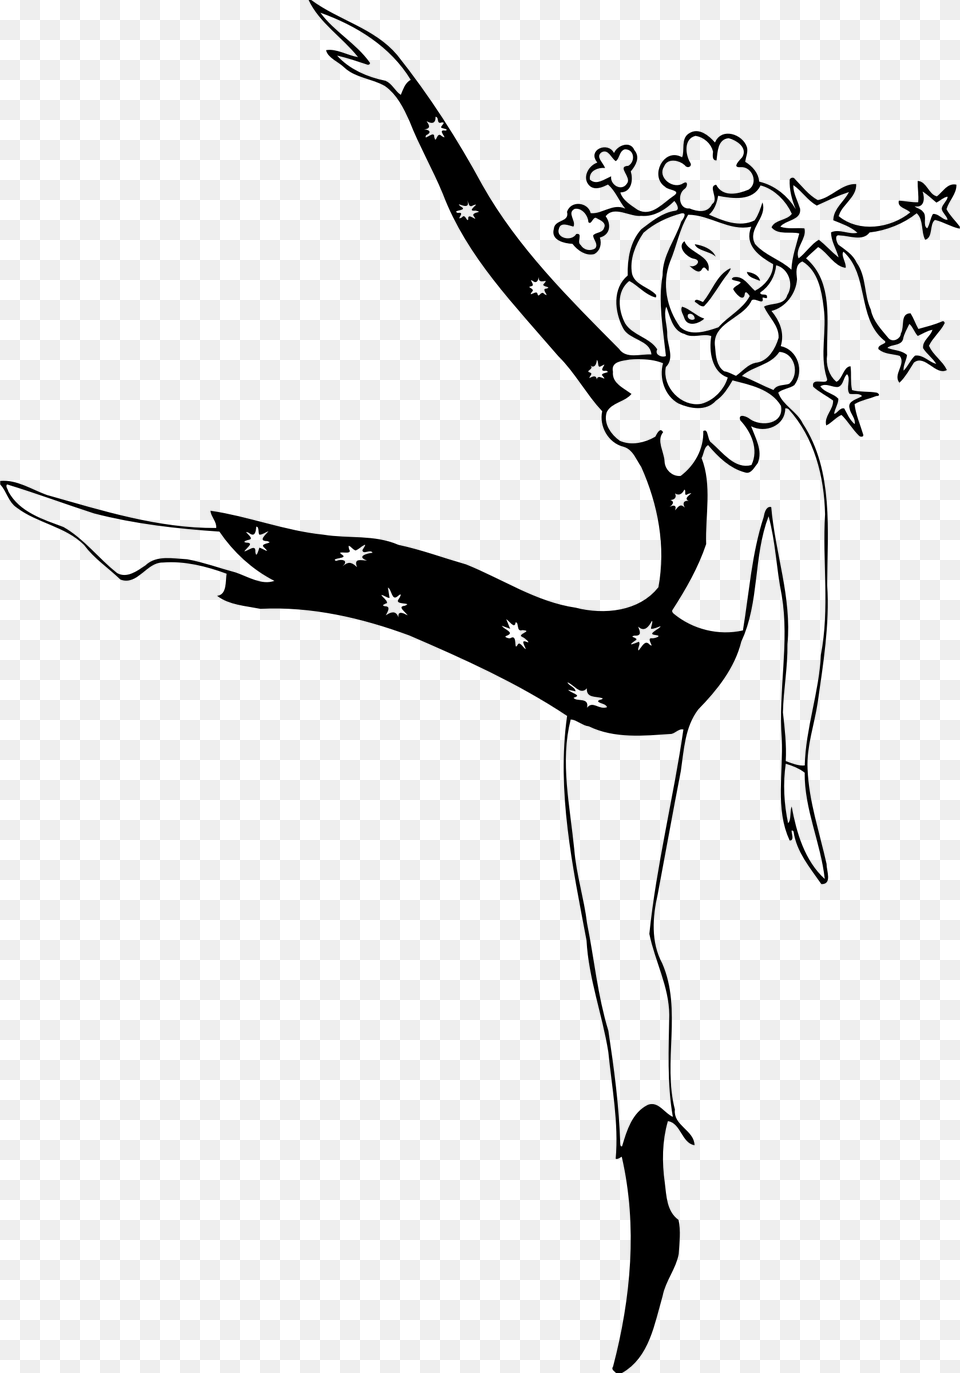 This Icons Design Of Dancer 23 Line Drawing, Gray Png Image